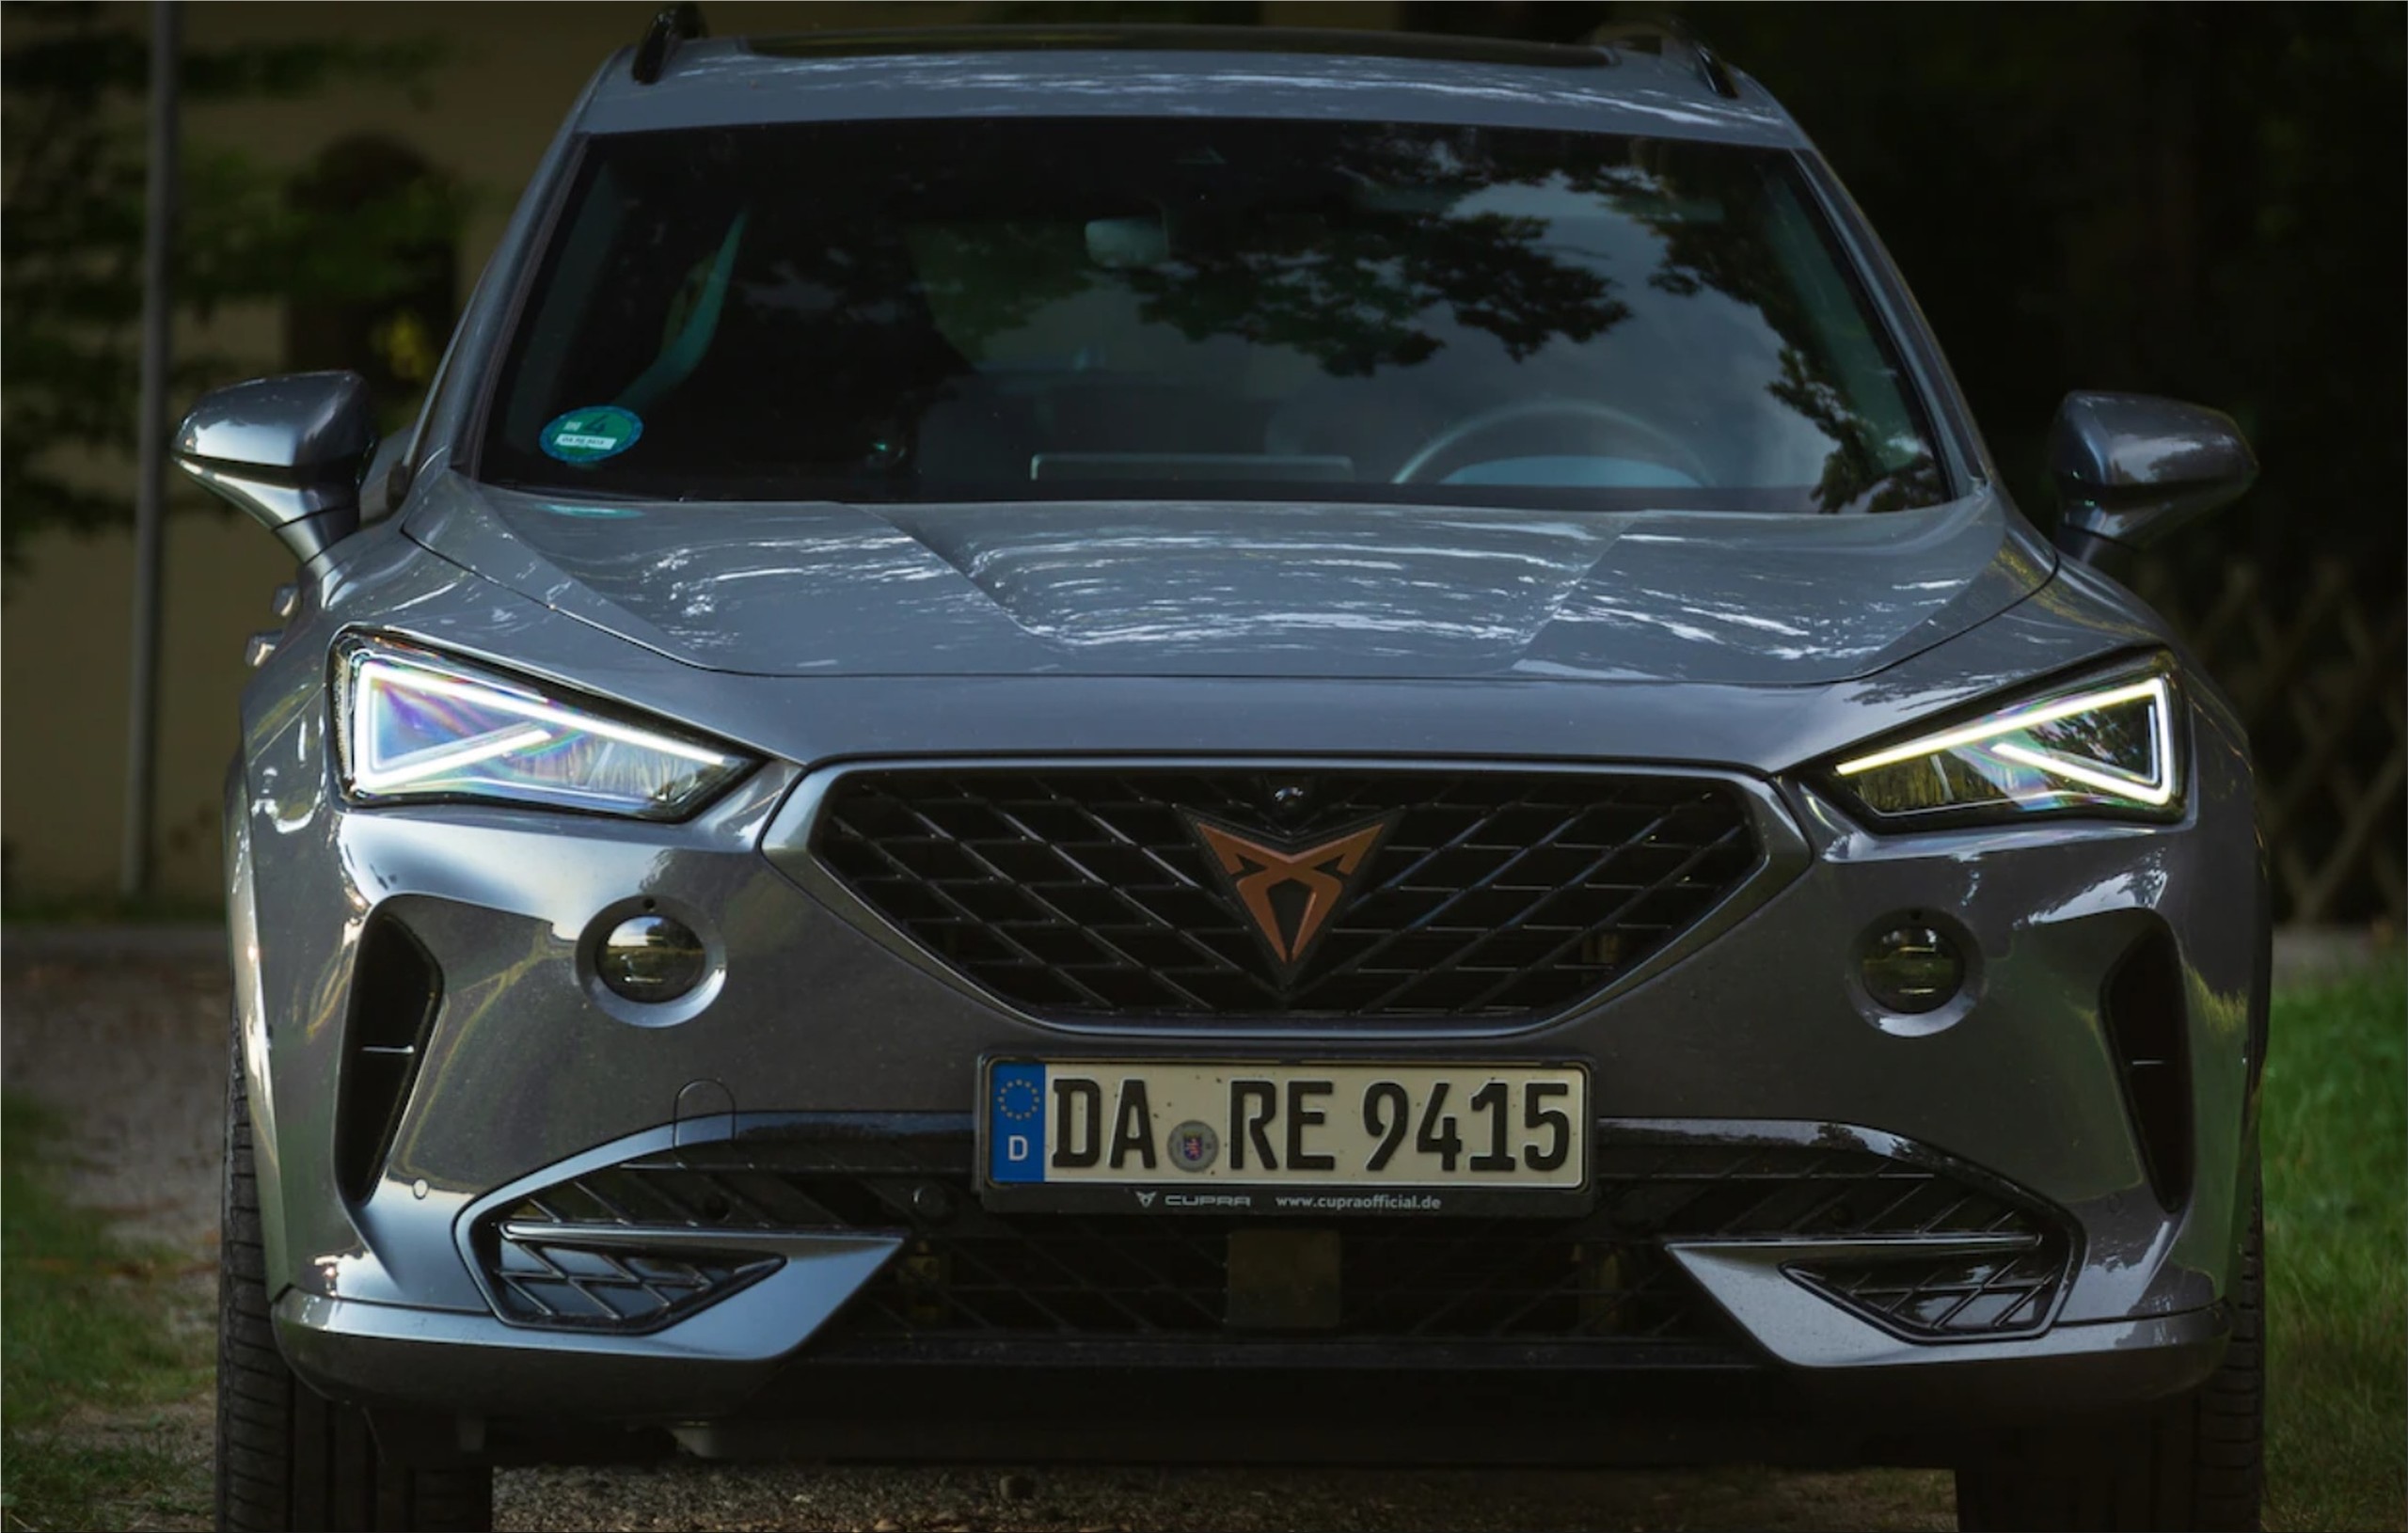 Cupra Formentor review: a sporty SUV with premium flavour 2024